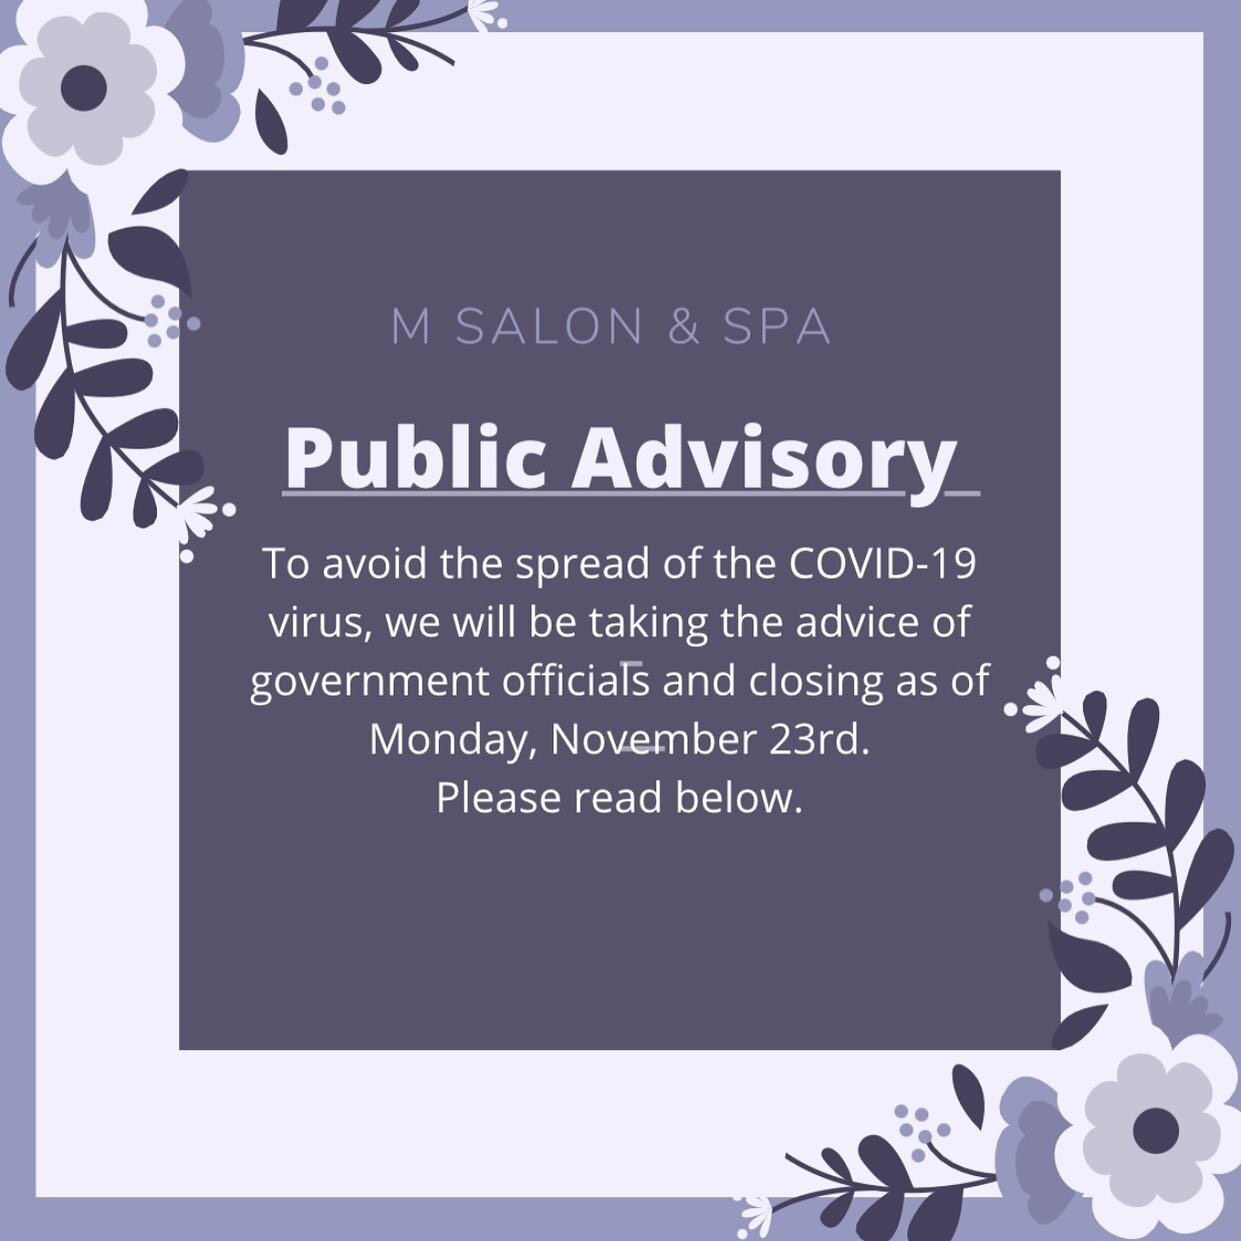 While we are sorry to hear the announcement made today by Premier Doug Ford, we will be closing the salon as of Monday, November 23rd.
If you have an appointment booked with us, don&rsquo;t worry we will be contacting you as soon as we are able to re